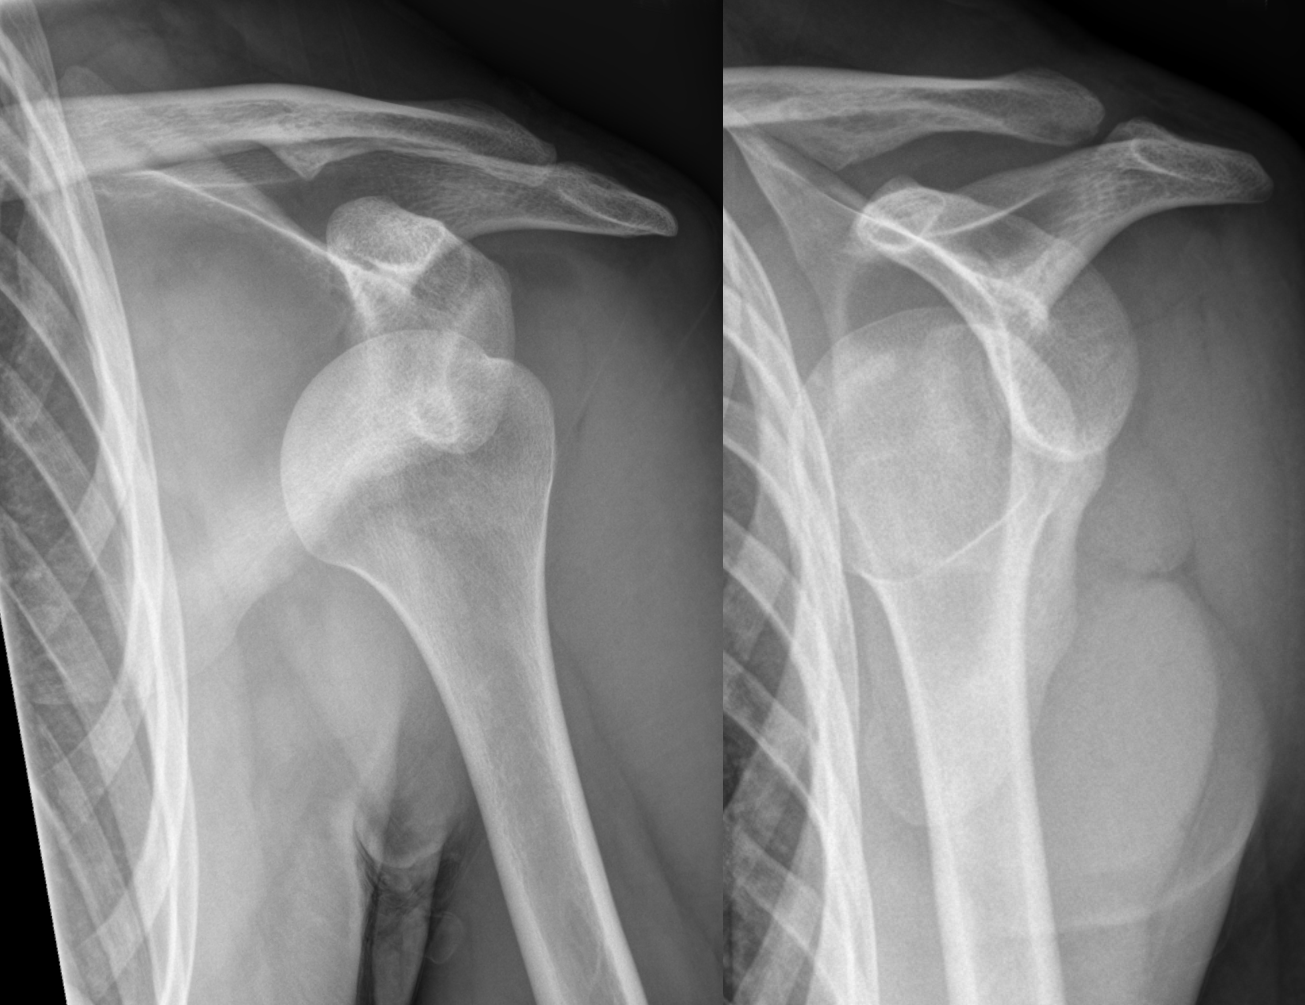 Anterior dislocation of the left shoulder